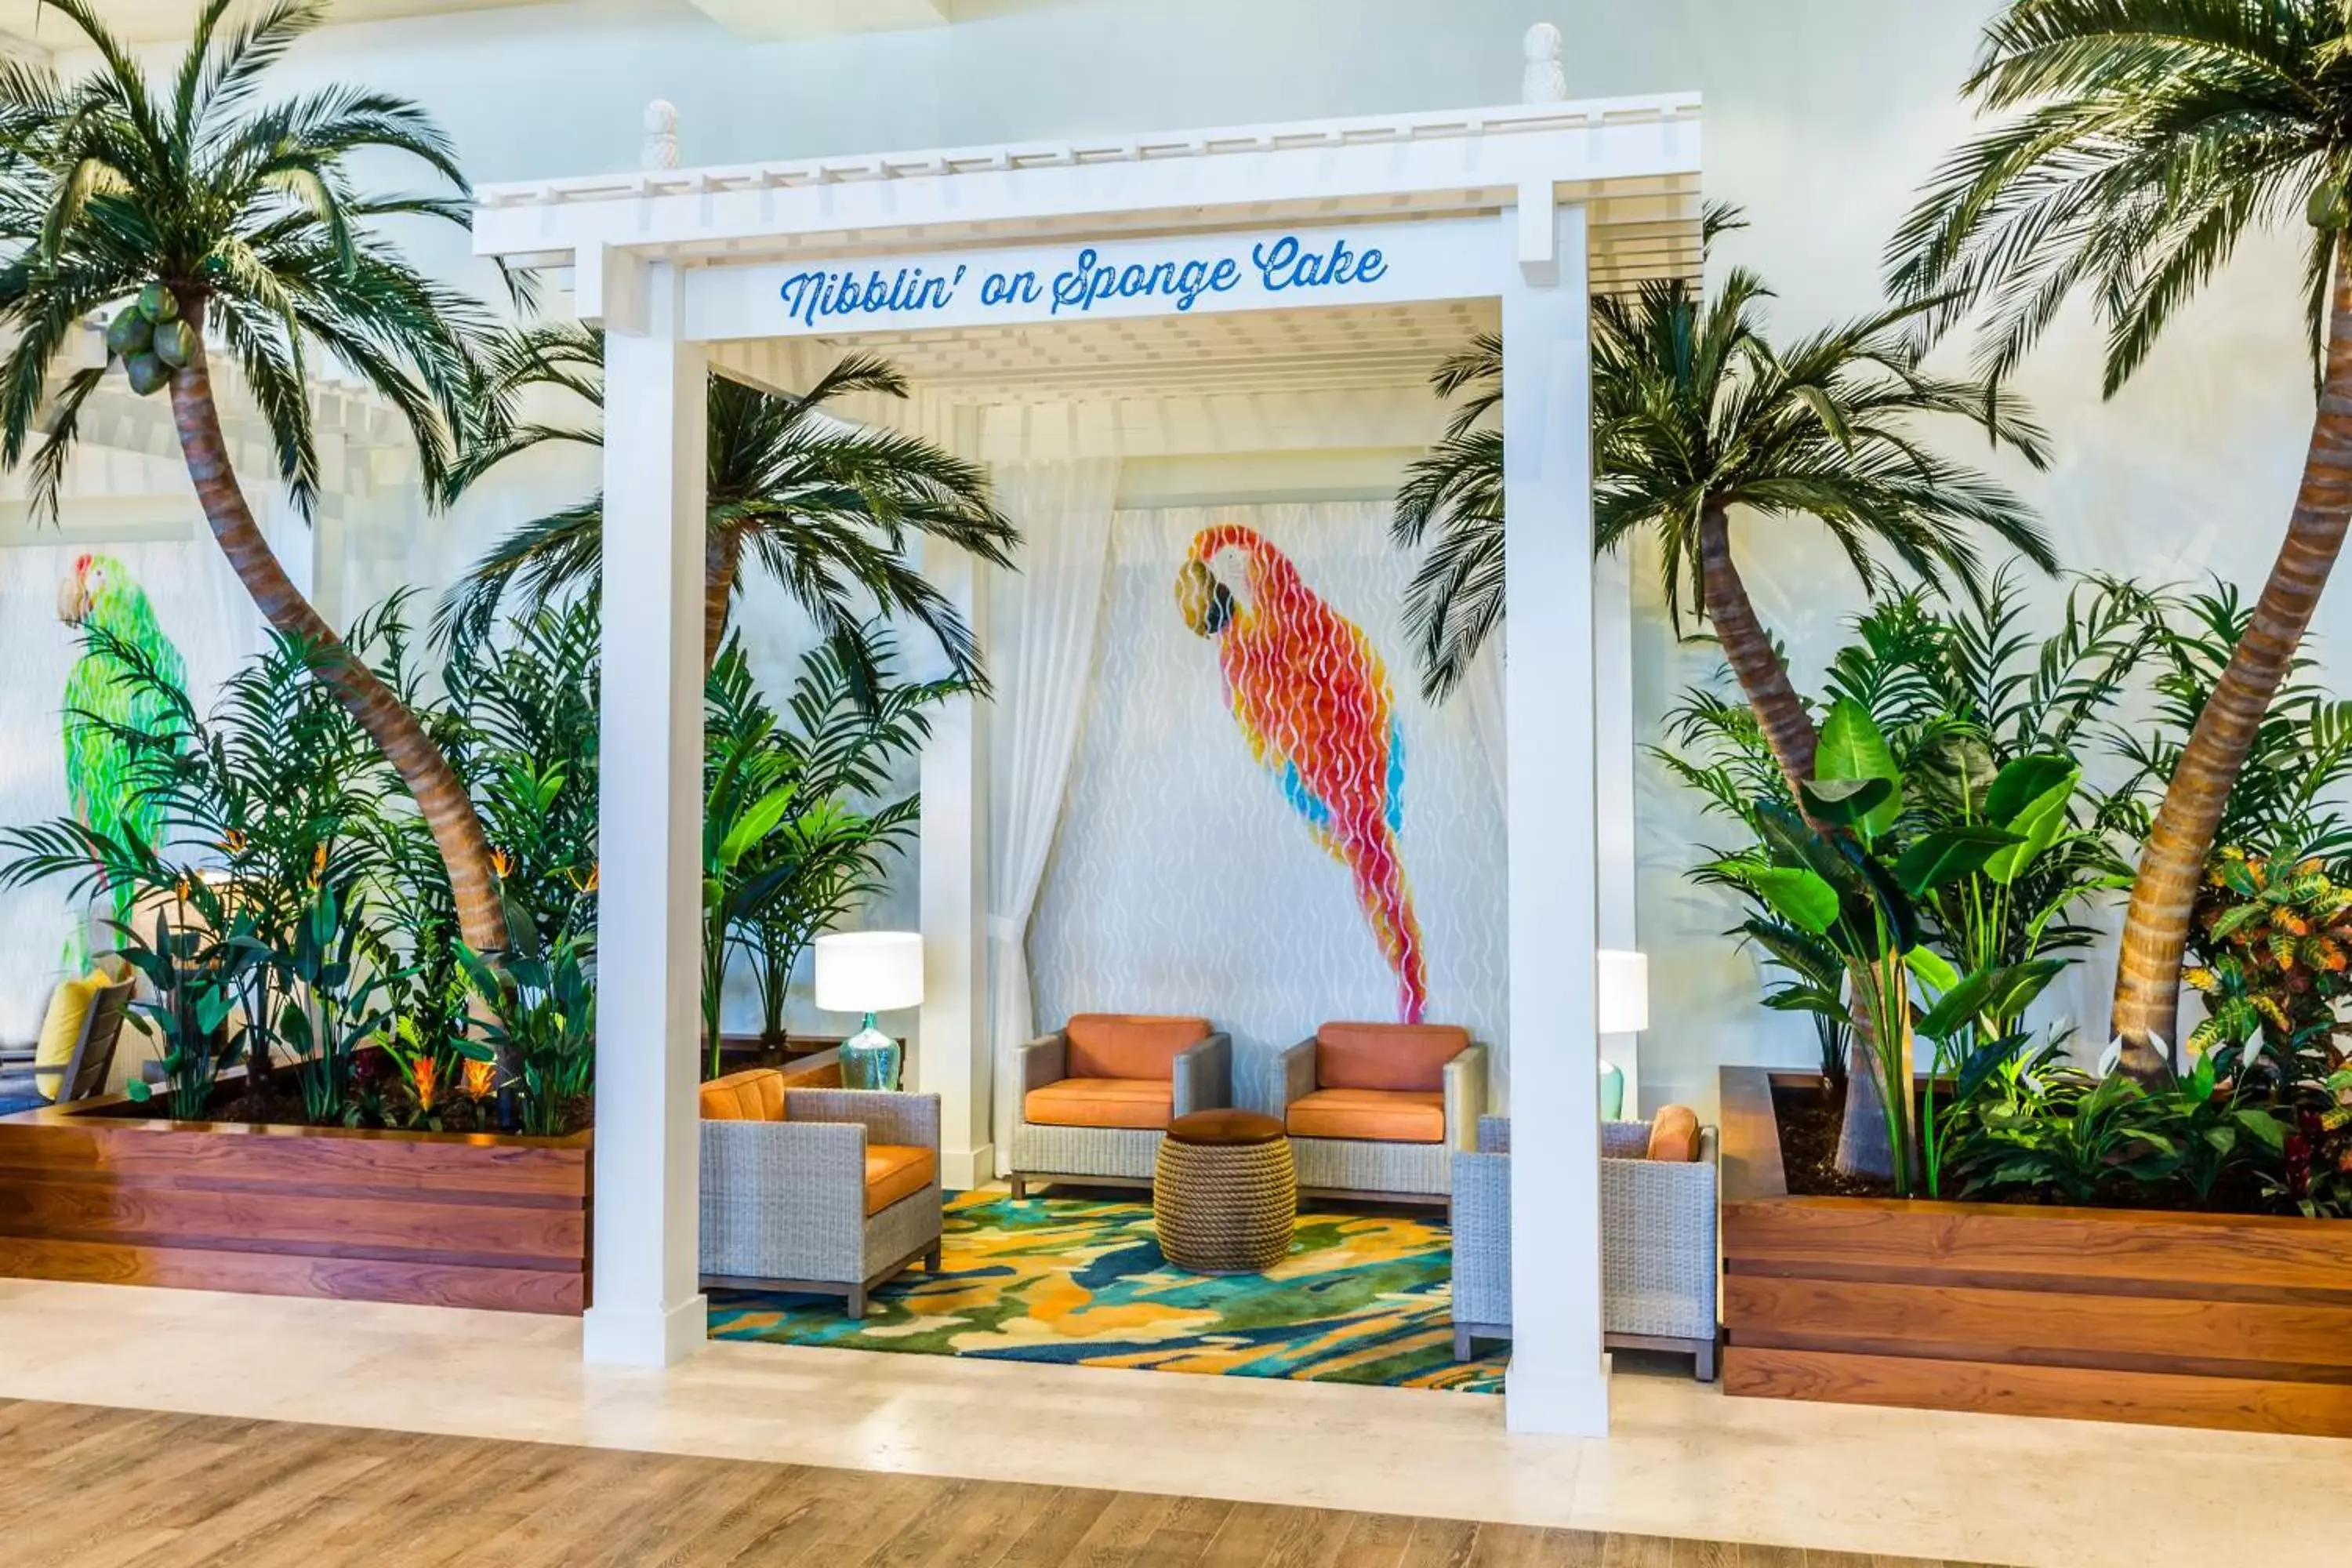 Area and facilities in Margaritaville Hollywood Beach Resort